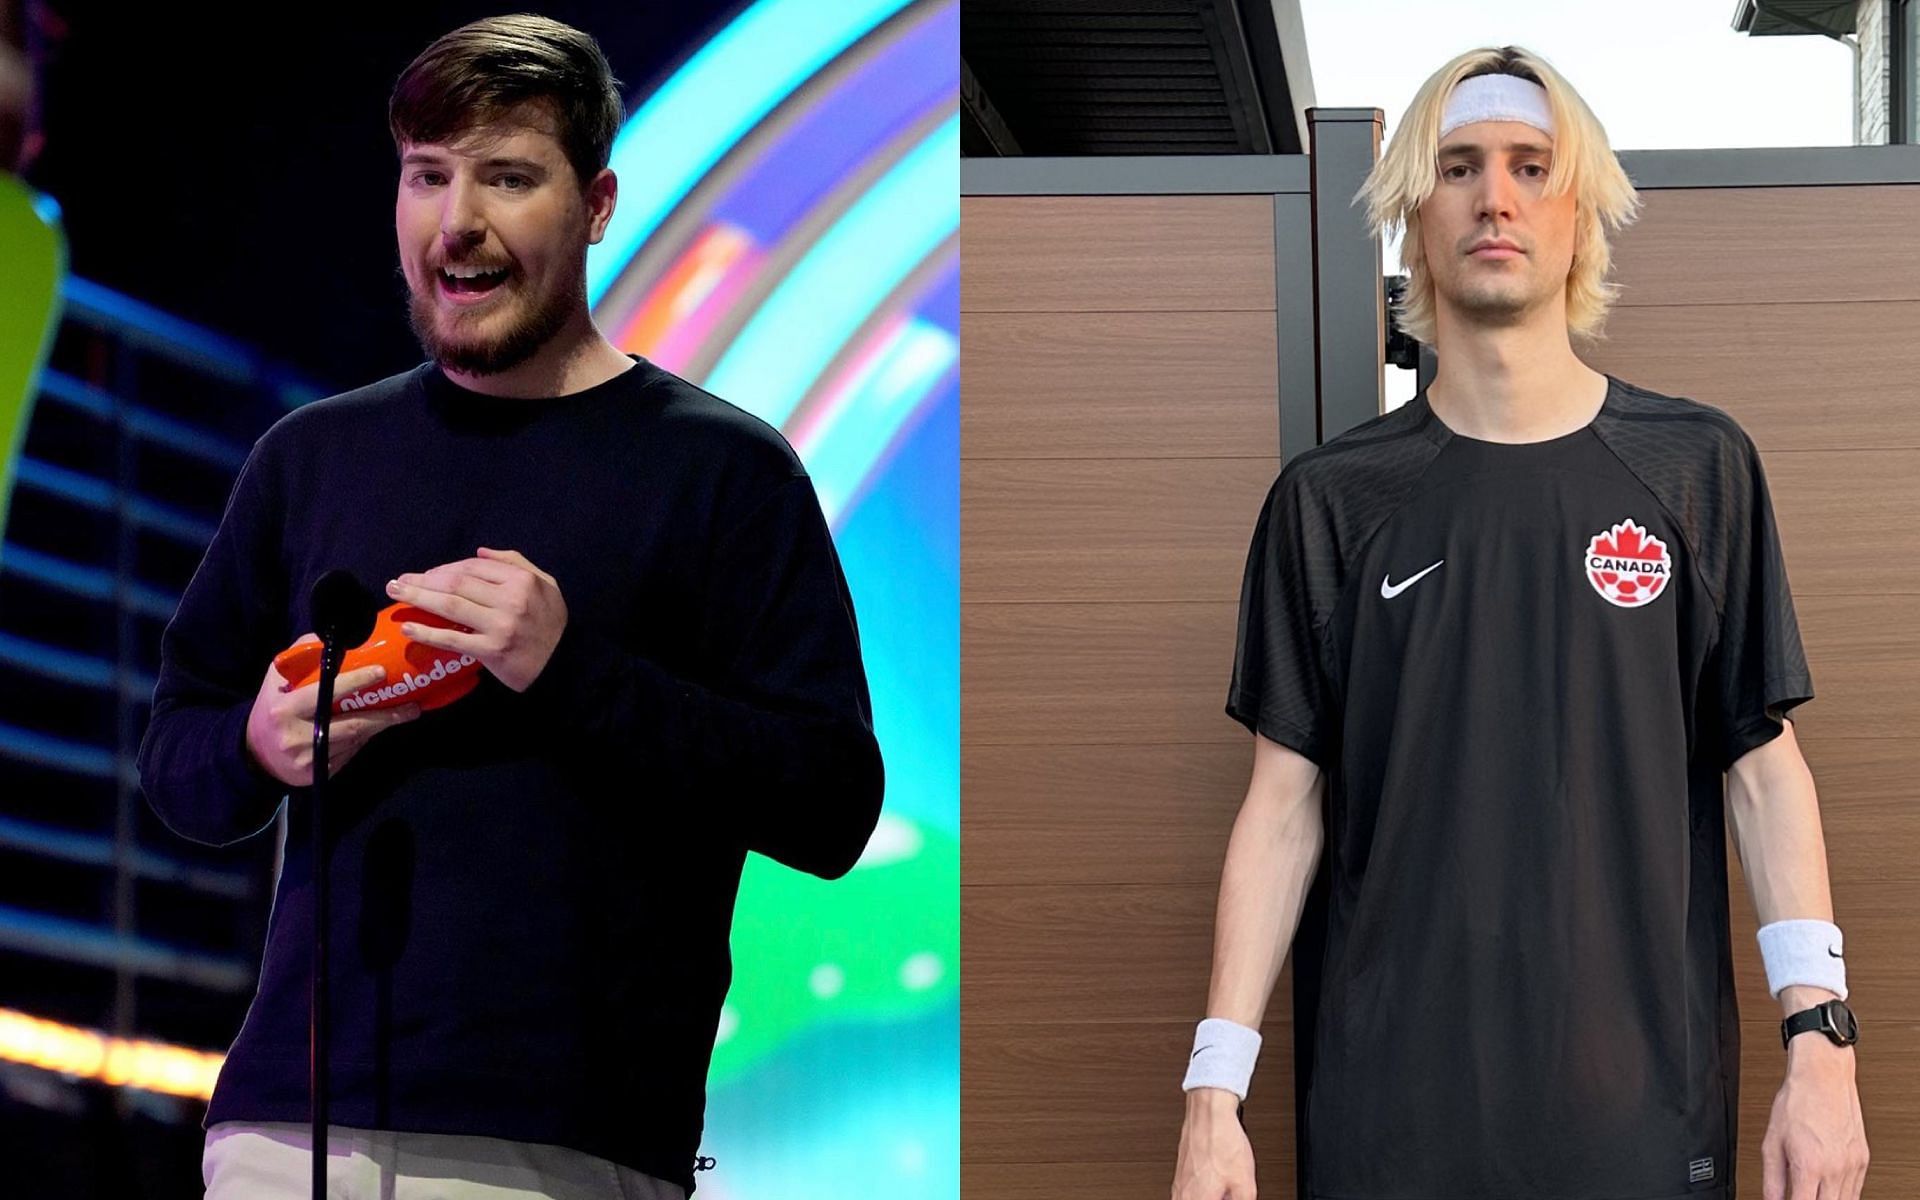 The Multiverse Is REAL!” – Fans Left Surprised at the Sight of Seeing Both  MrBeast, the Real and 'The Fake,' Together - EssentiallySports